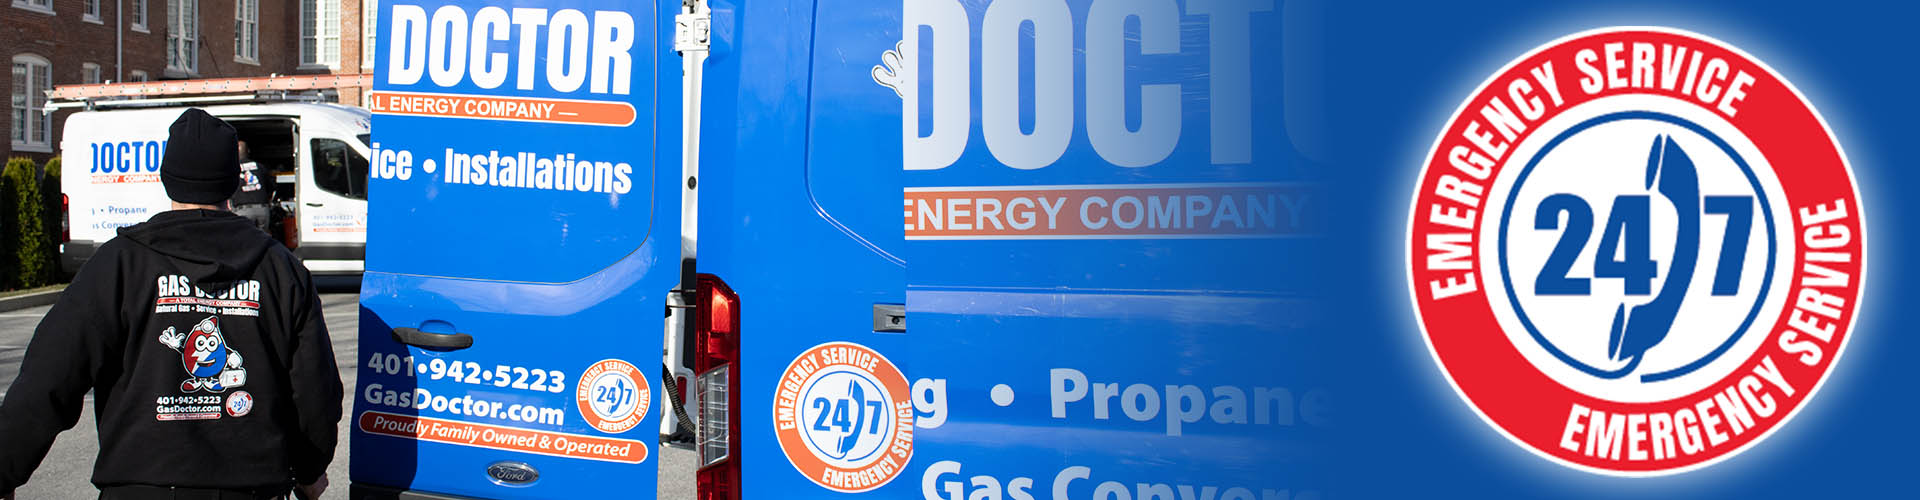 Gas Doctor offers 24/7 Emergency Heating Service for RI & Southeastern MA